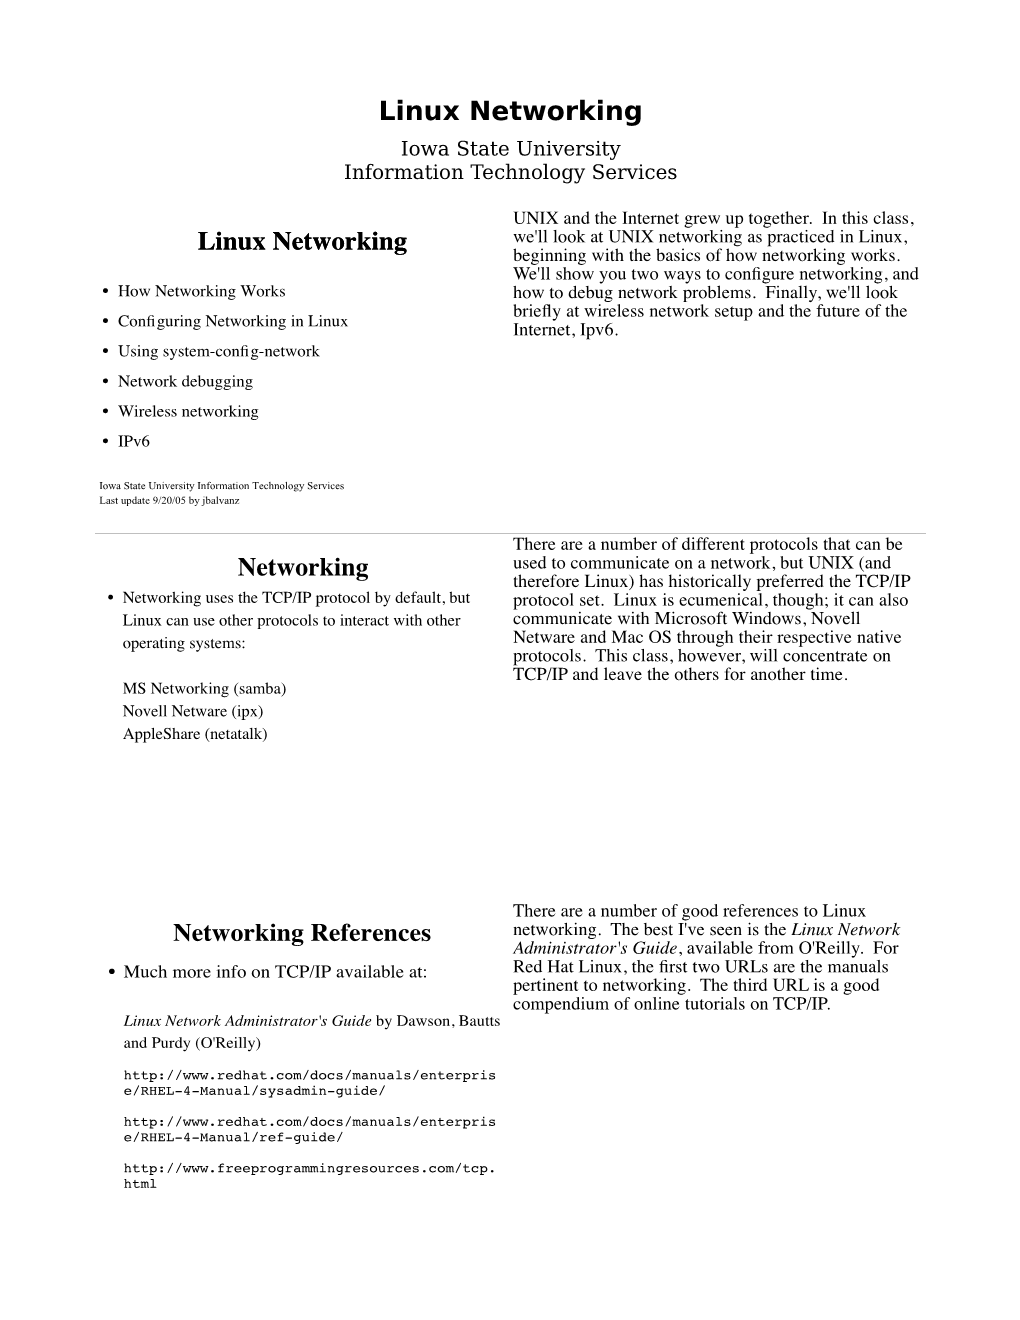 Linux Networking Iowa State University Information Technology Services